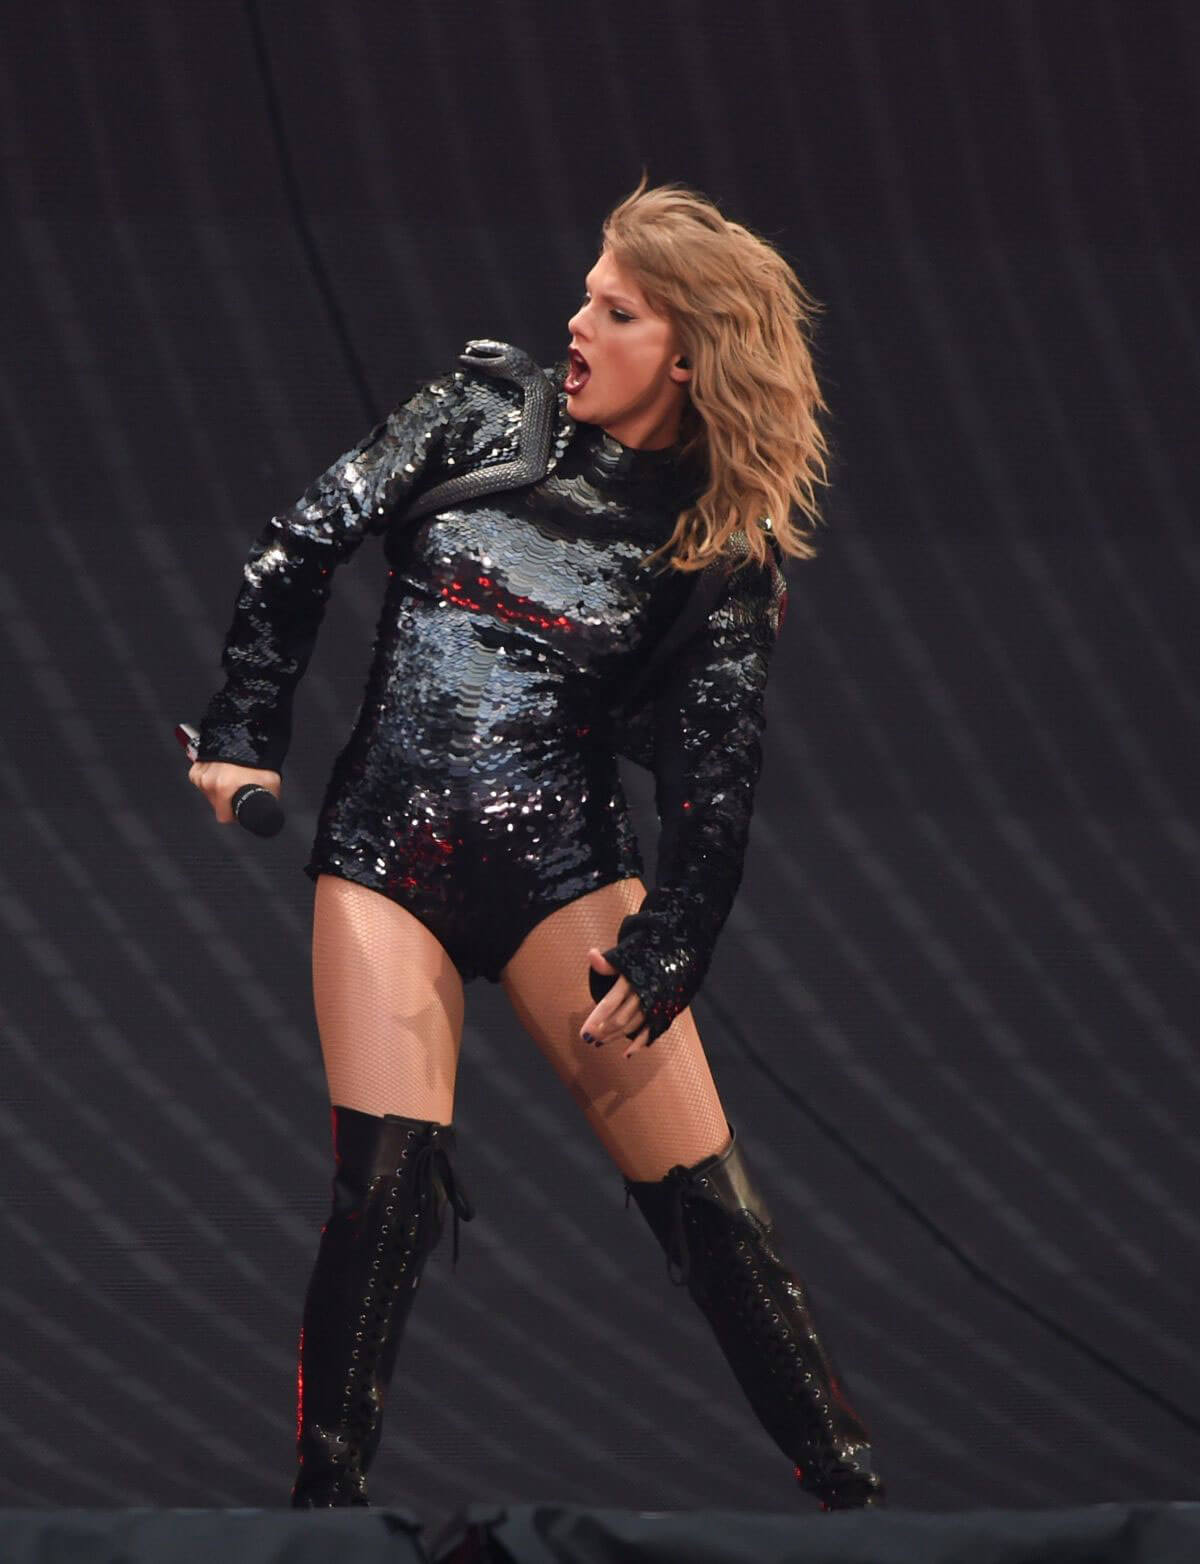 Taylor Swift at Her Reputation Tour at Etihad Stadium in Manchester 2018/06/08